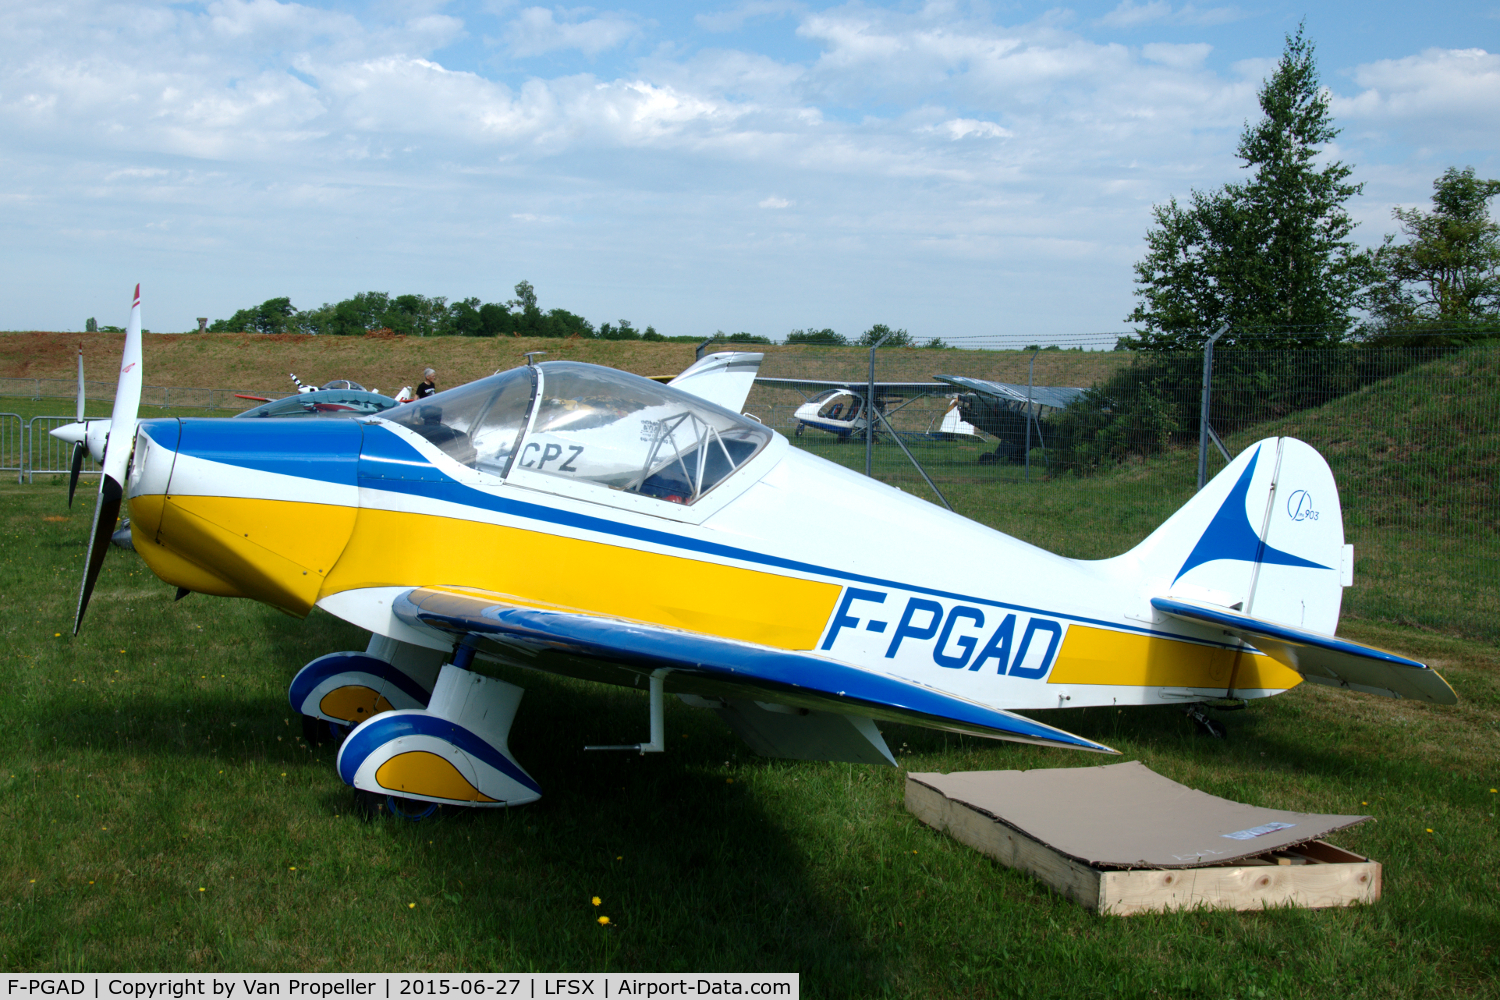 F-PGAD, SIPA 903 C/N 40, Nice looking SIPA S.903 small light aircraft parked at Luxeuil Air Base for Air meeting 2015. The box in which it came is next to it.